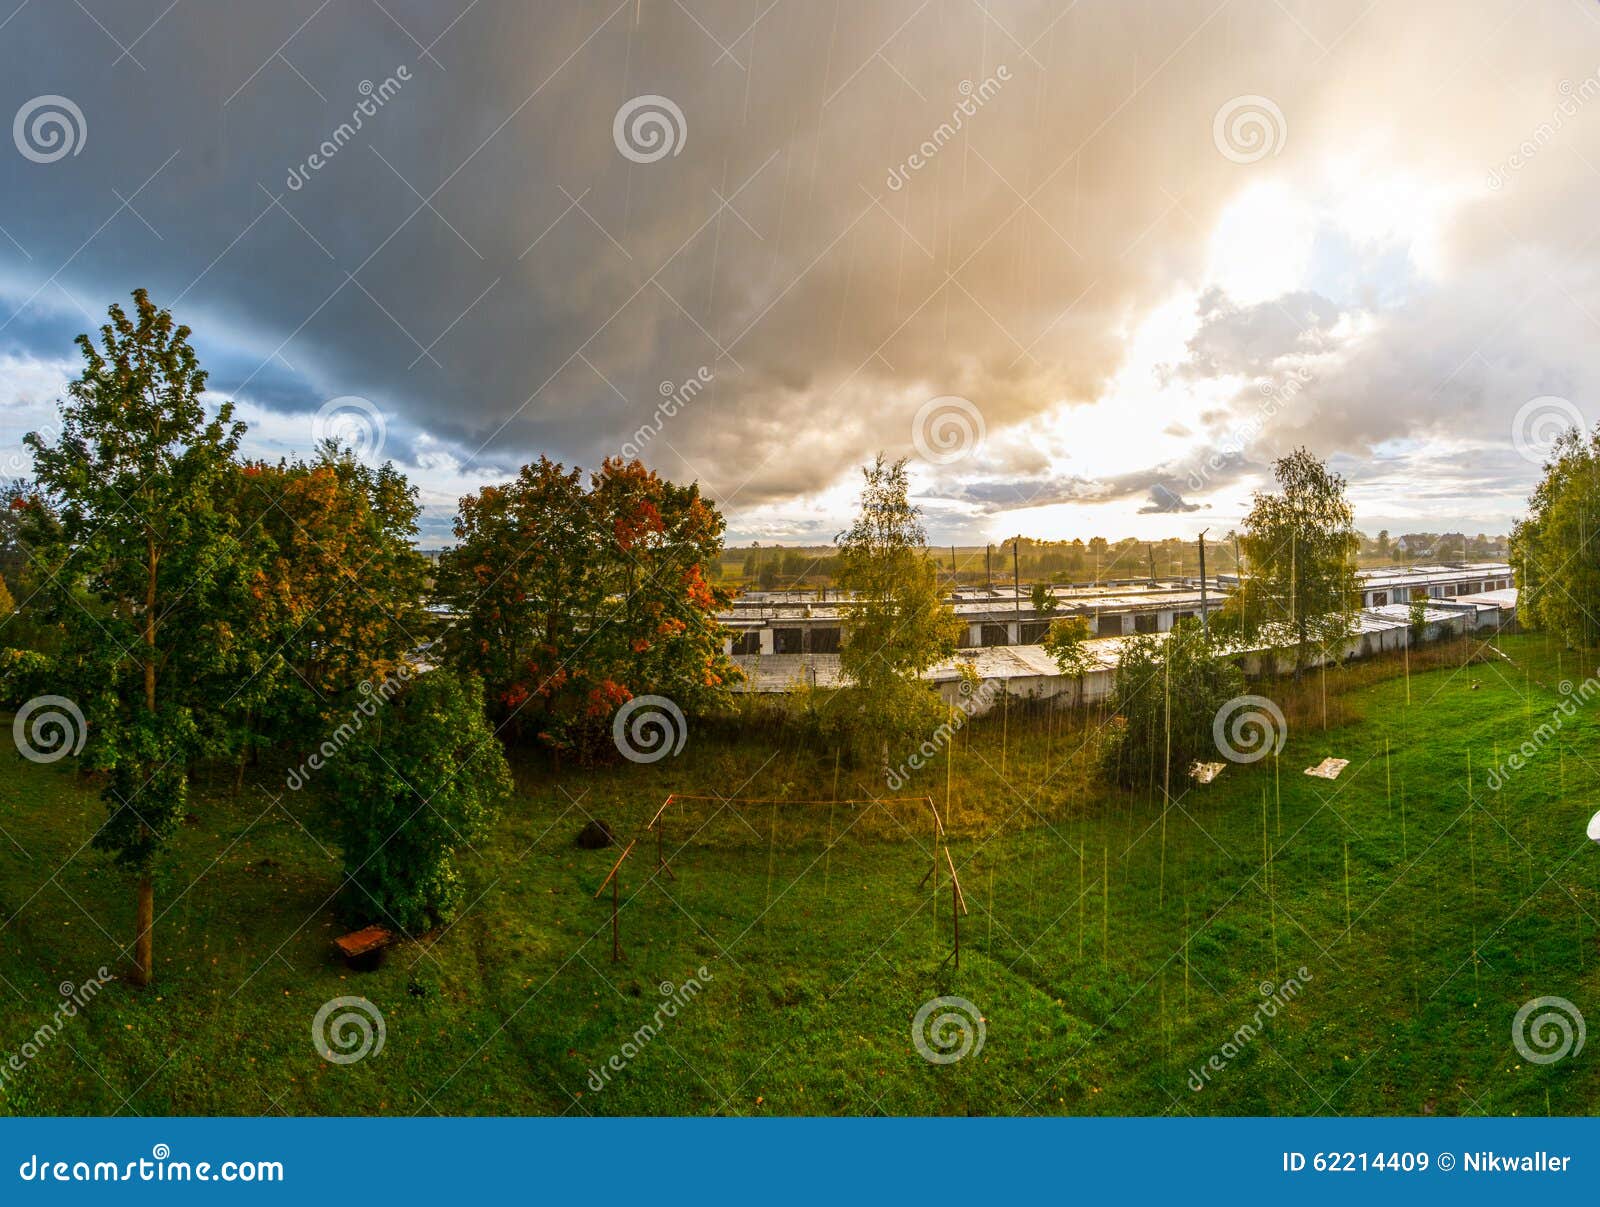 and Rain. Epic Sky. Nature Landscape Stock Image - of storm, 62214409